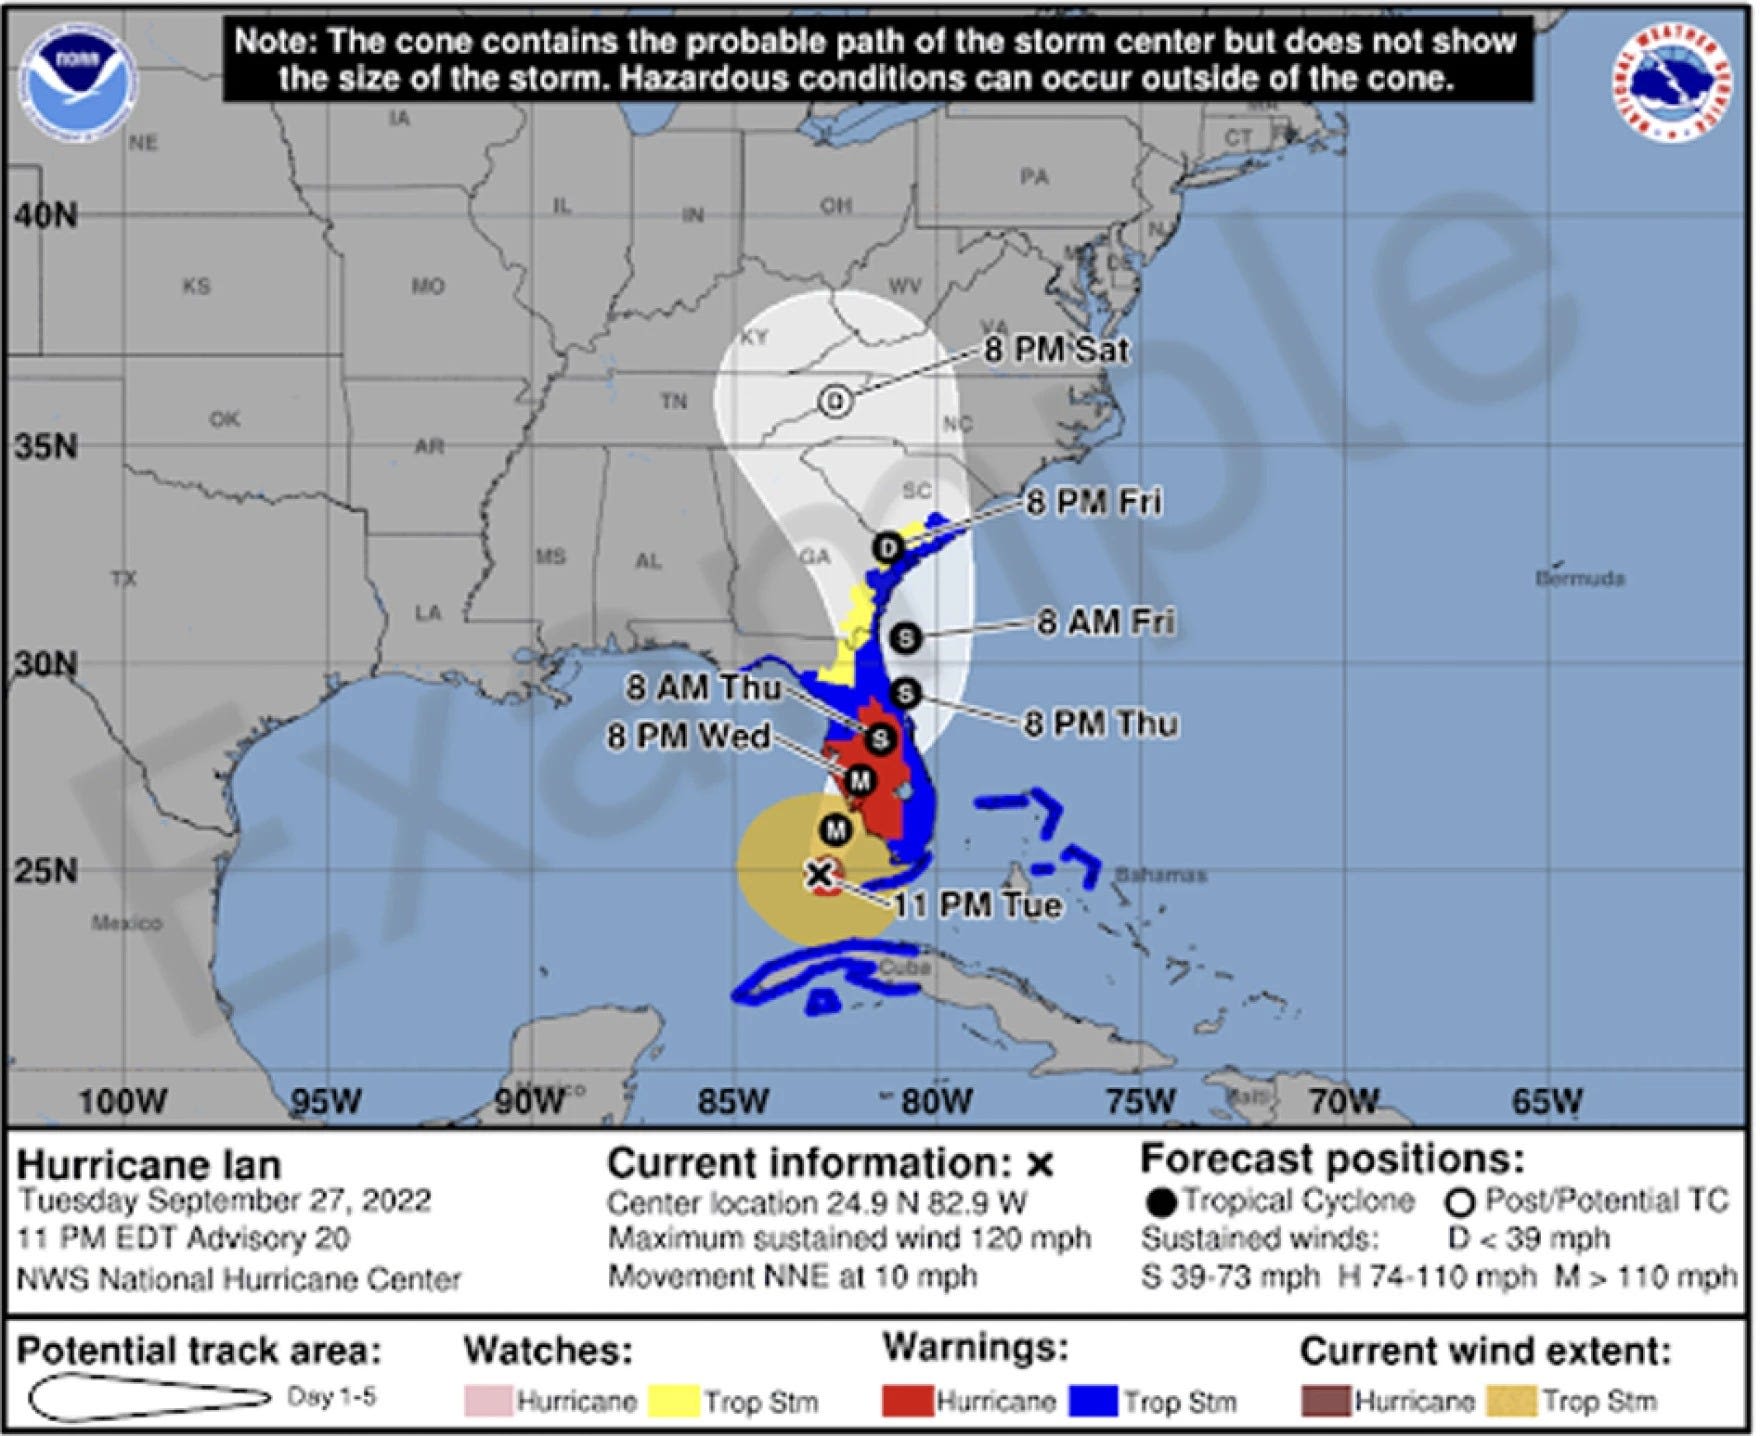 National Hurricane Center hoping new cone will stop fixation on Saffir-Simpson Scale